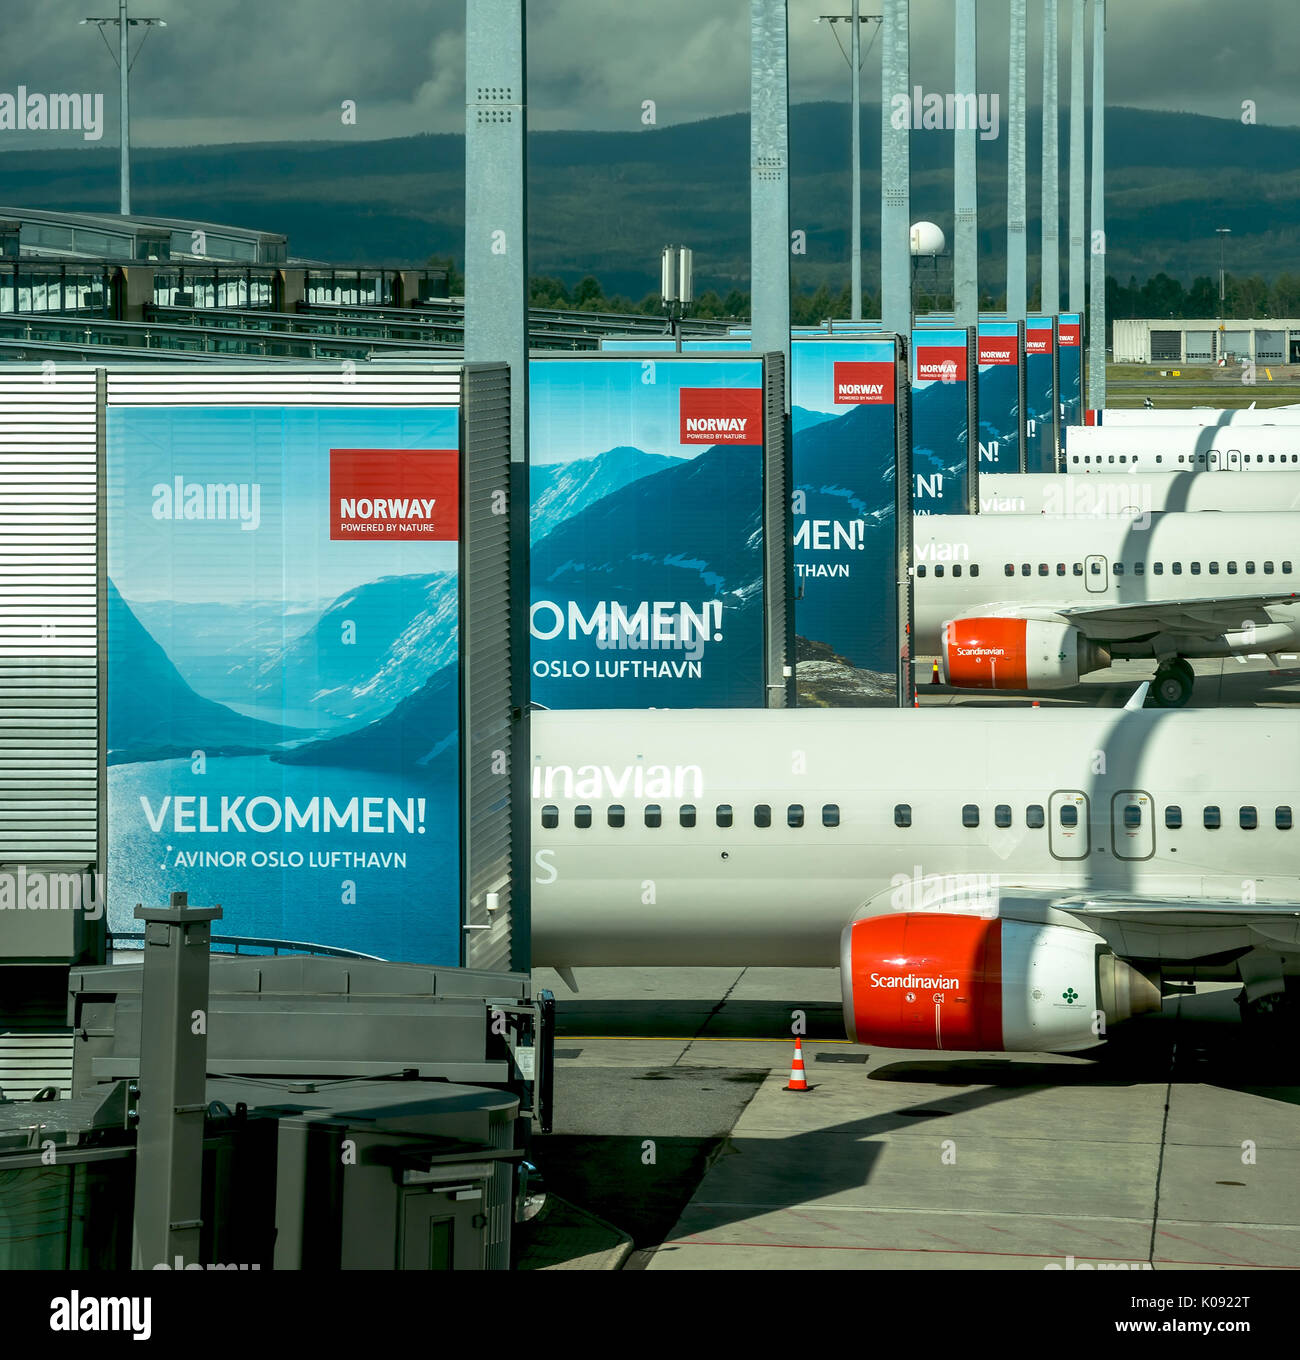 NORWAY, OSLO, GARDERMOEN AIRPORT - JULY 9, 2017: SAS Scandinavian airlines airplanes stands in parking positions in alignment, editorial Stock Photo